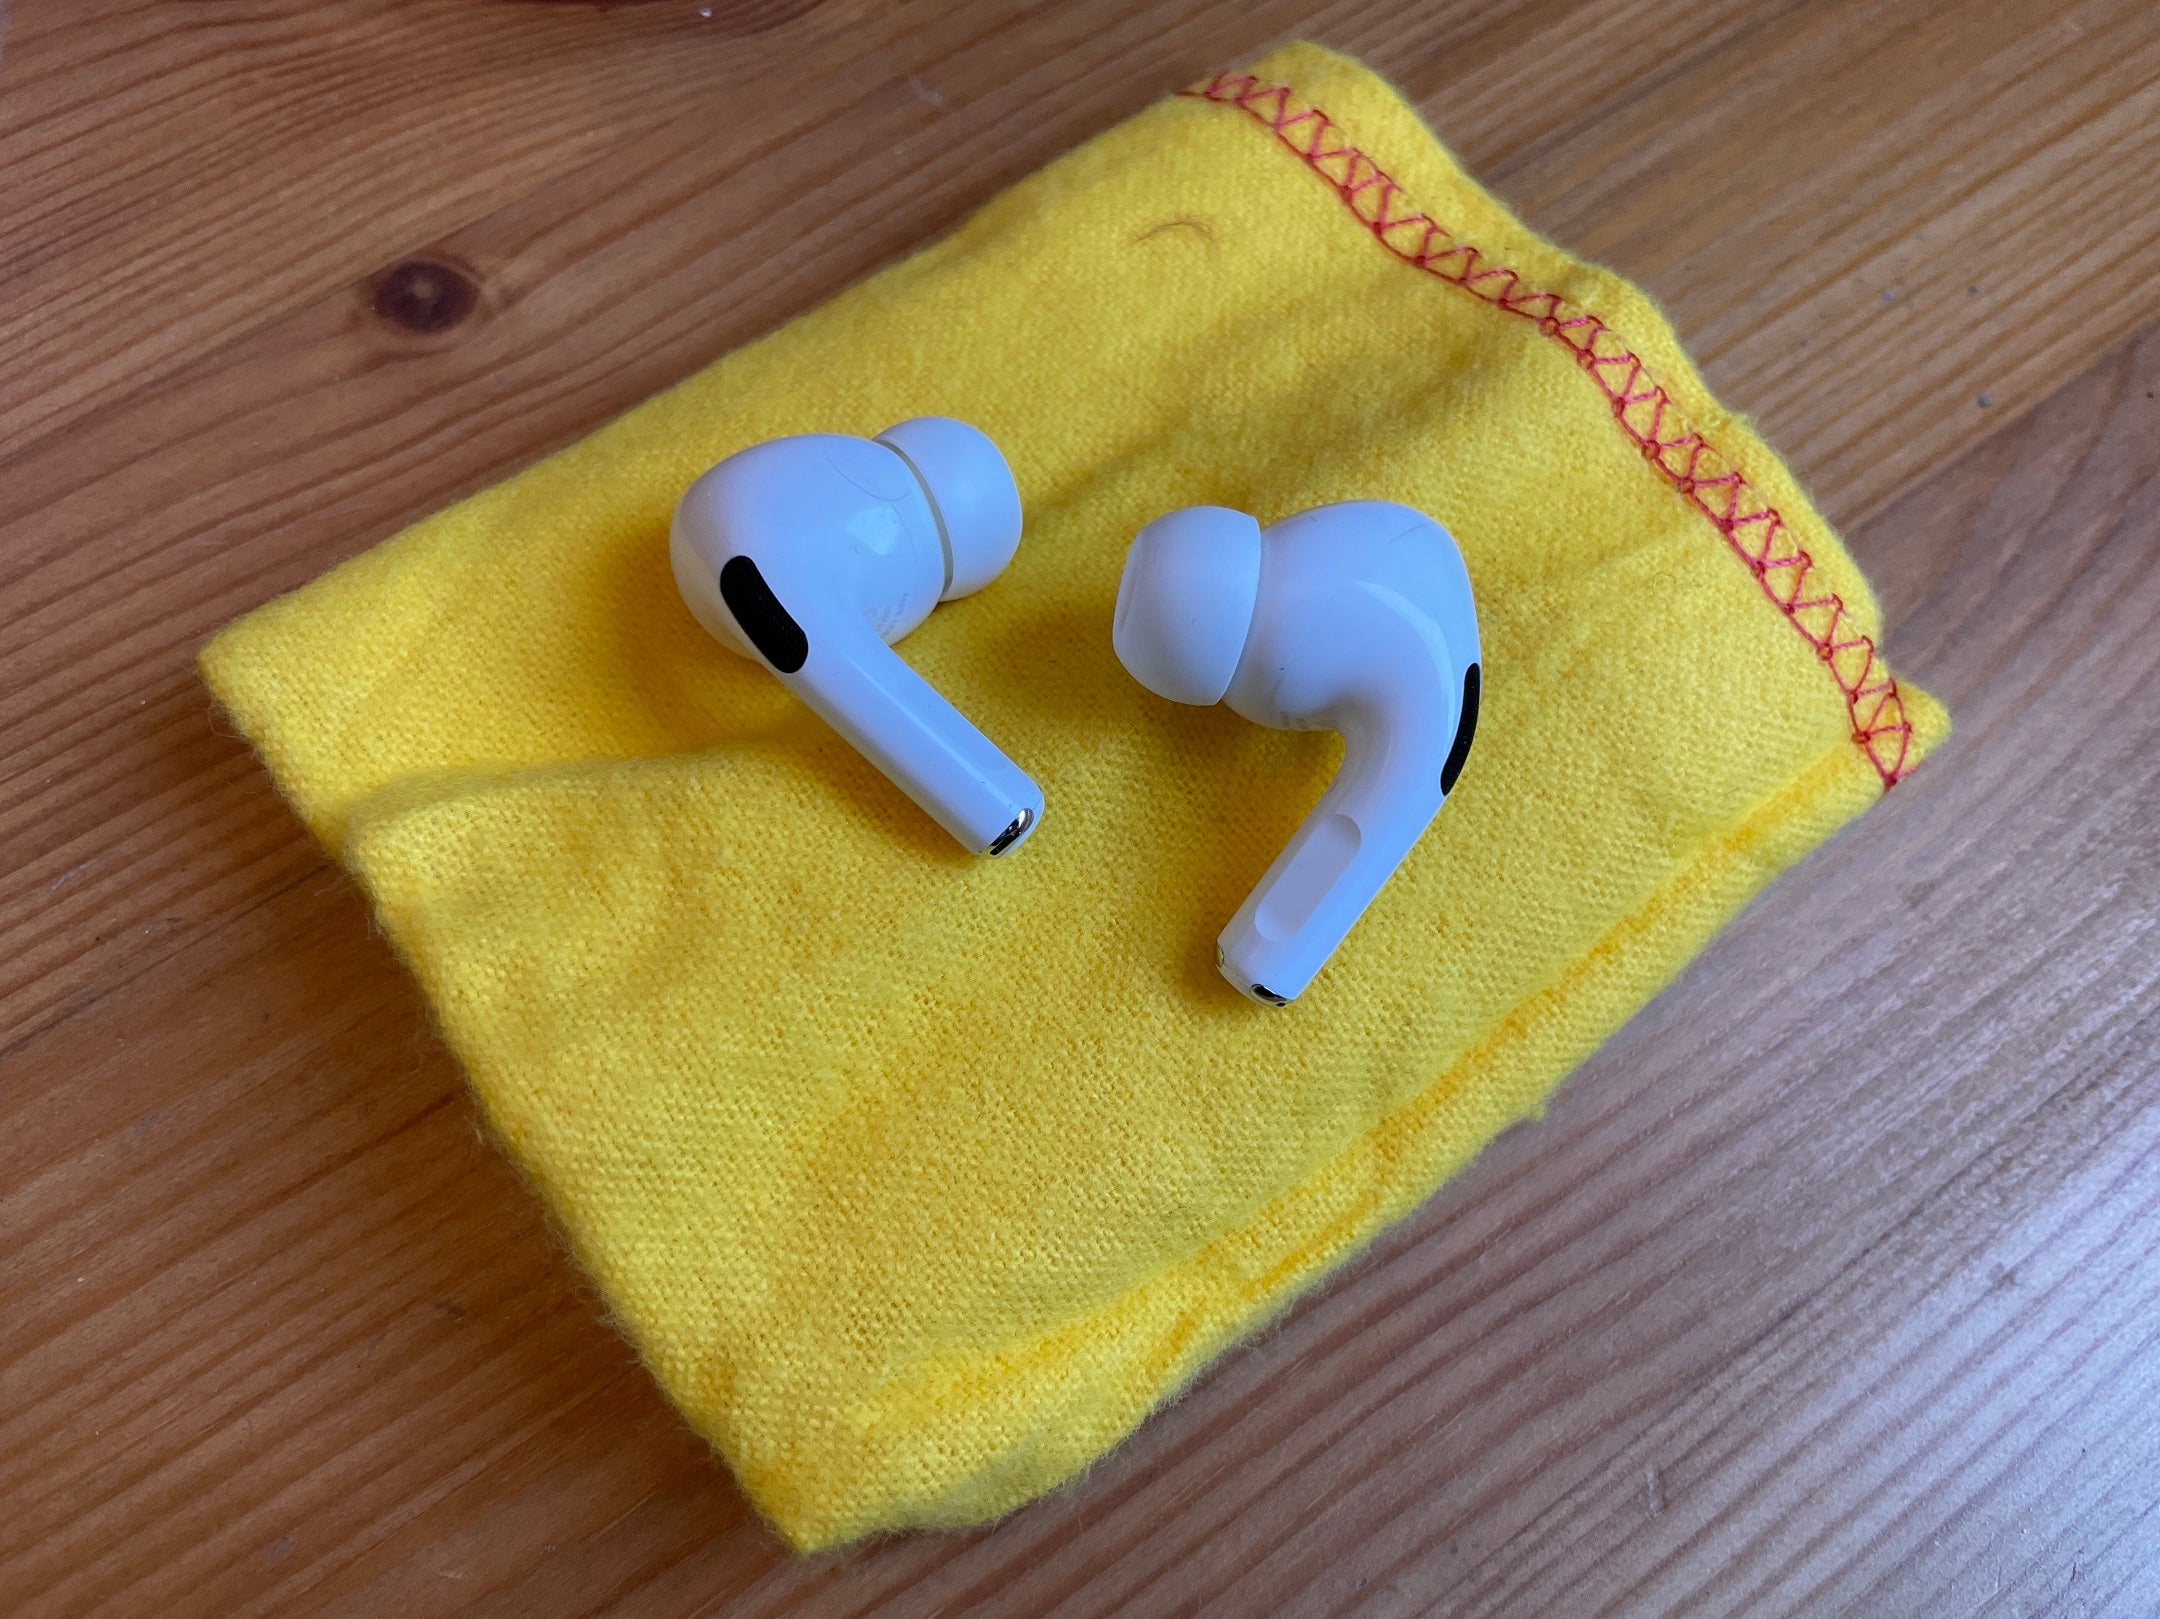 How to clean Apple AirPods Pro Step 1